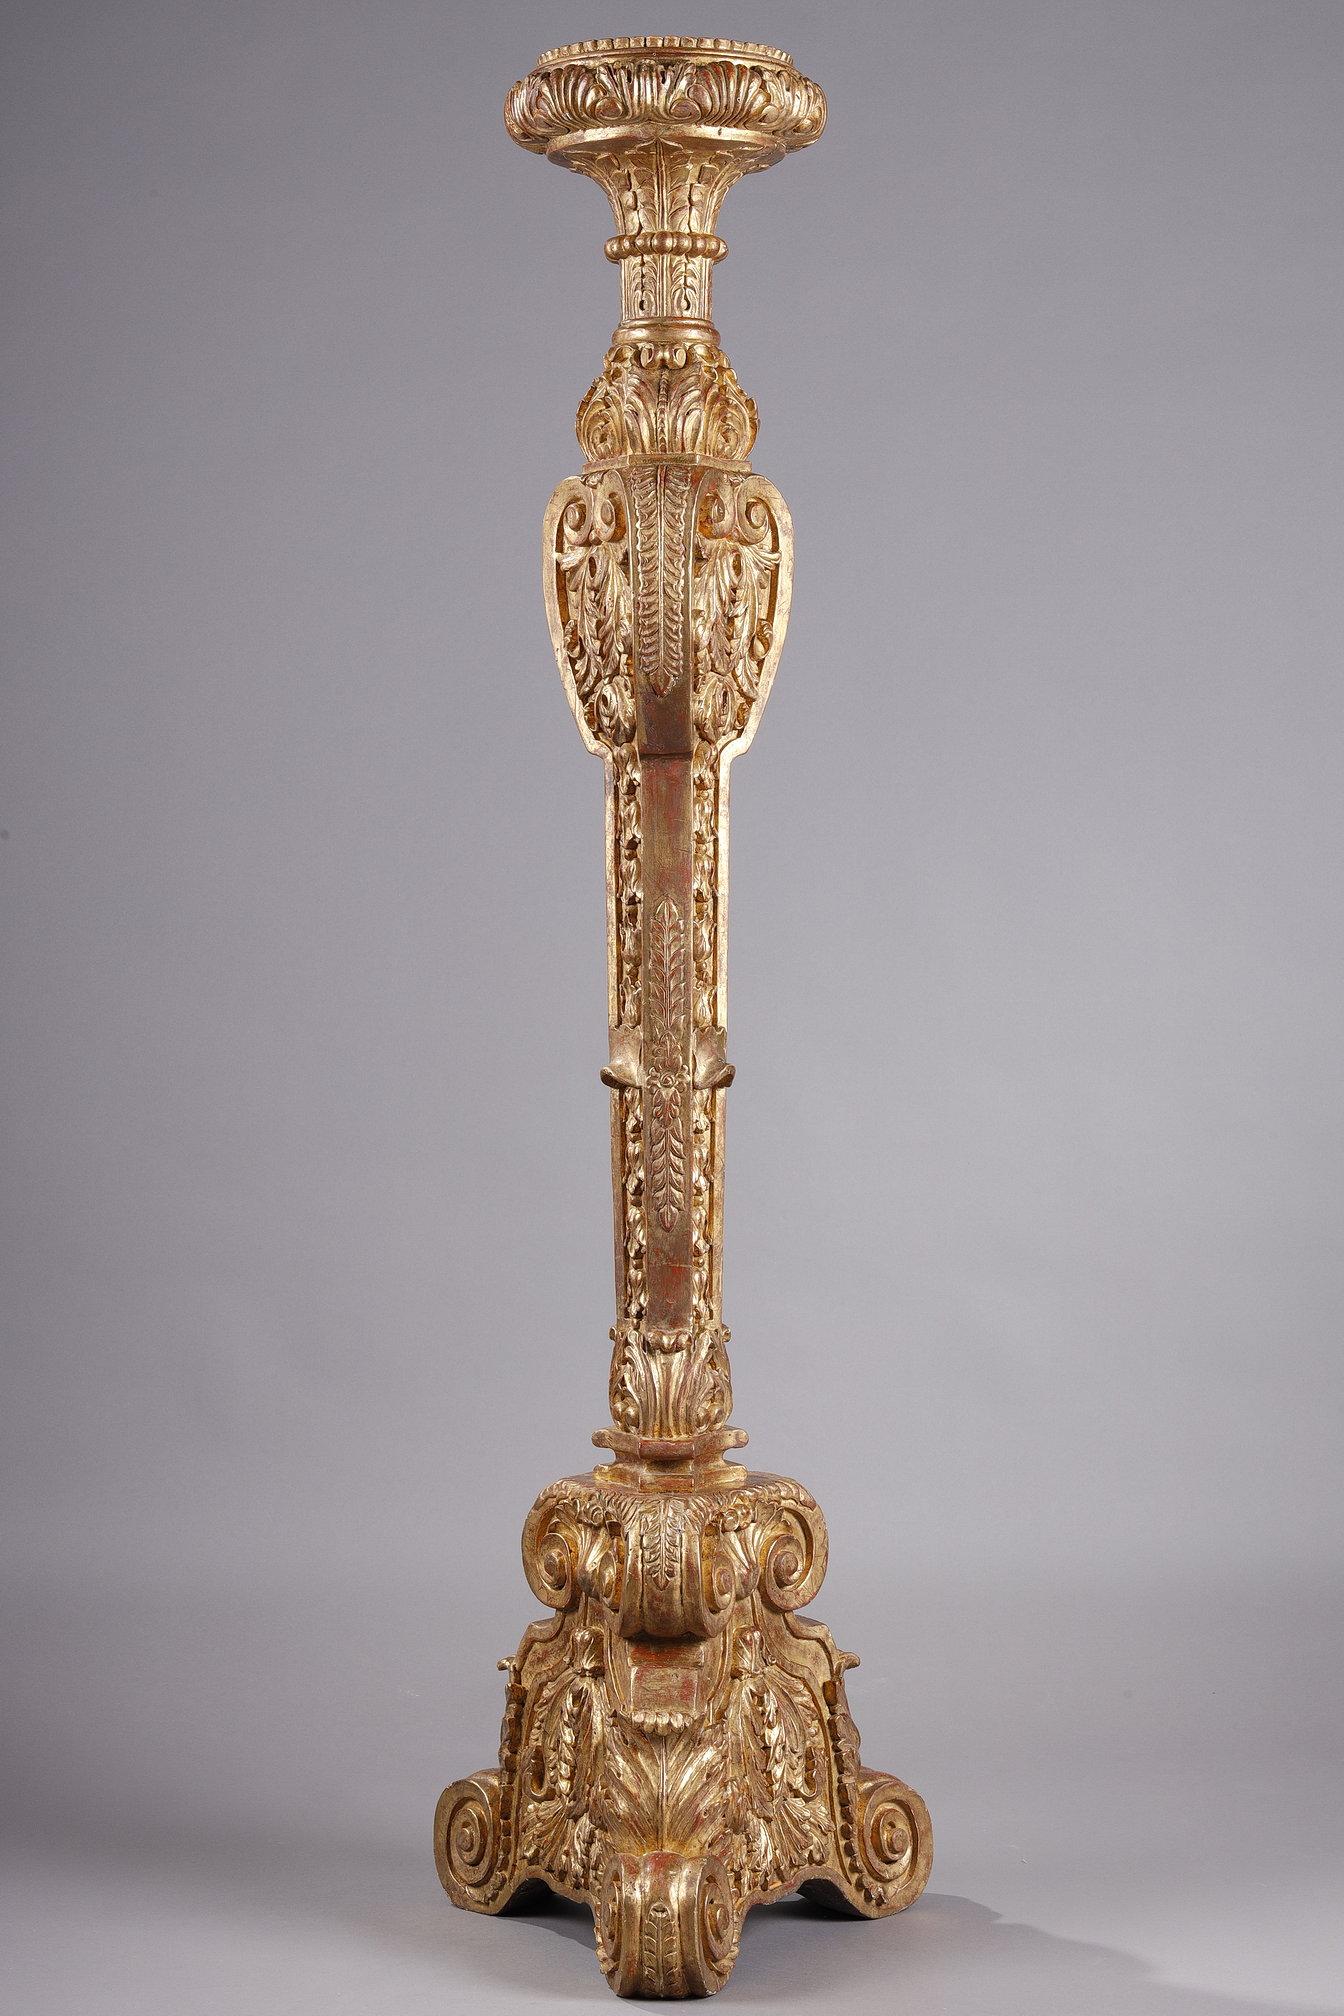 Stand or torchiere holder in gilded wood, molded and carved with shells, scrolls and acanthus leaves on a tripod base. Regency style. It can hold a torchiere or a vase.

What is a torchiere?
The word torchere is first mentioned, according to